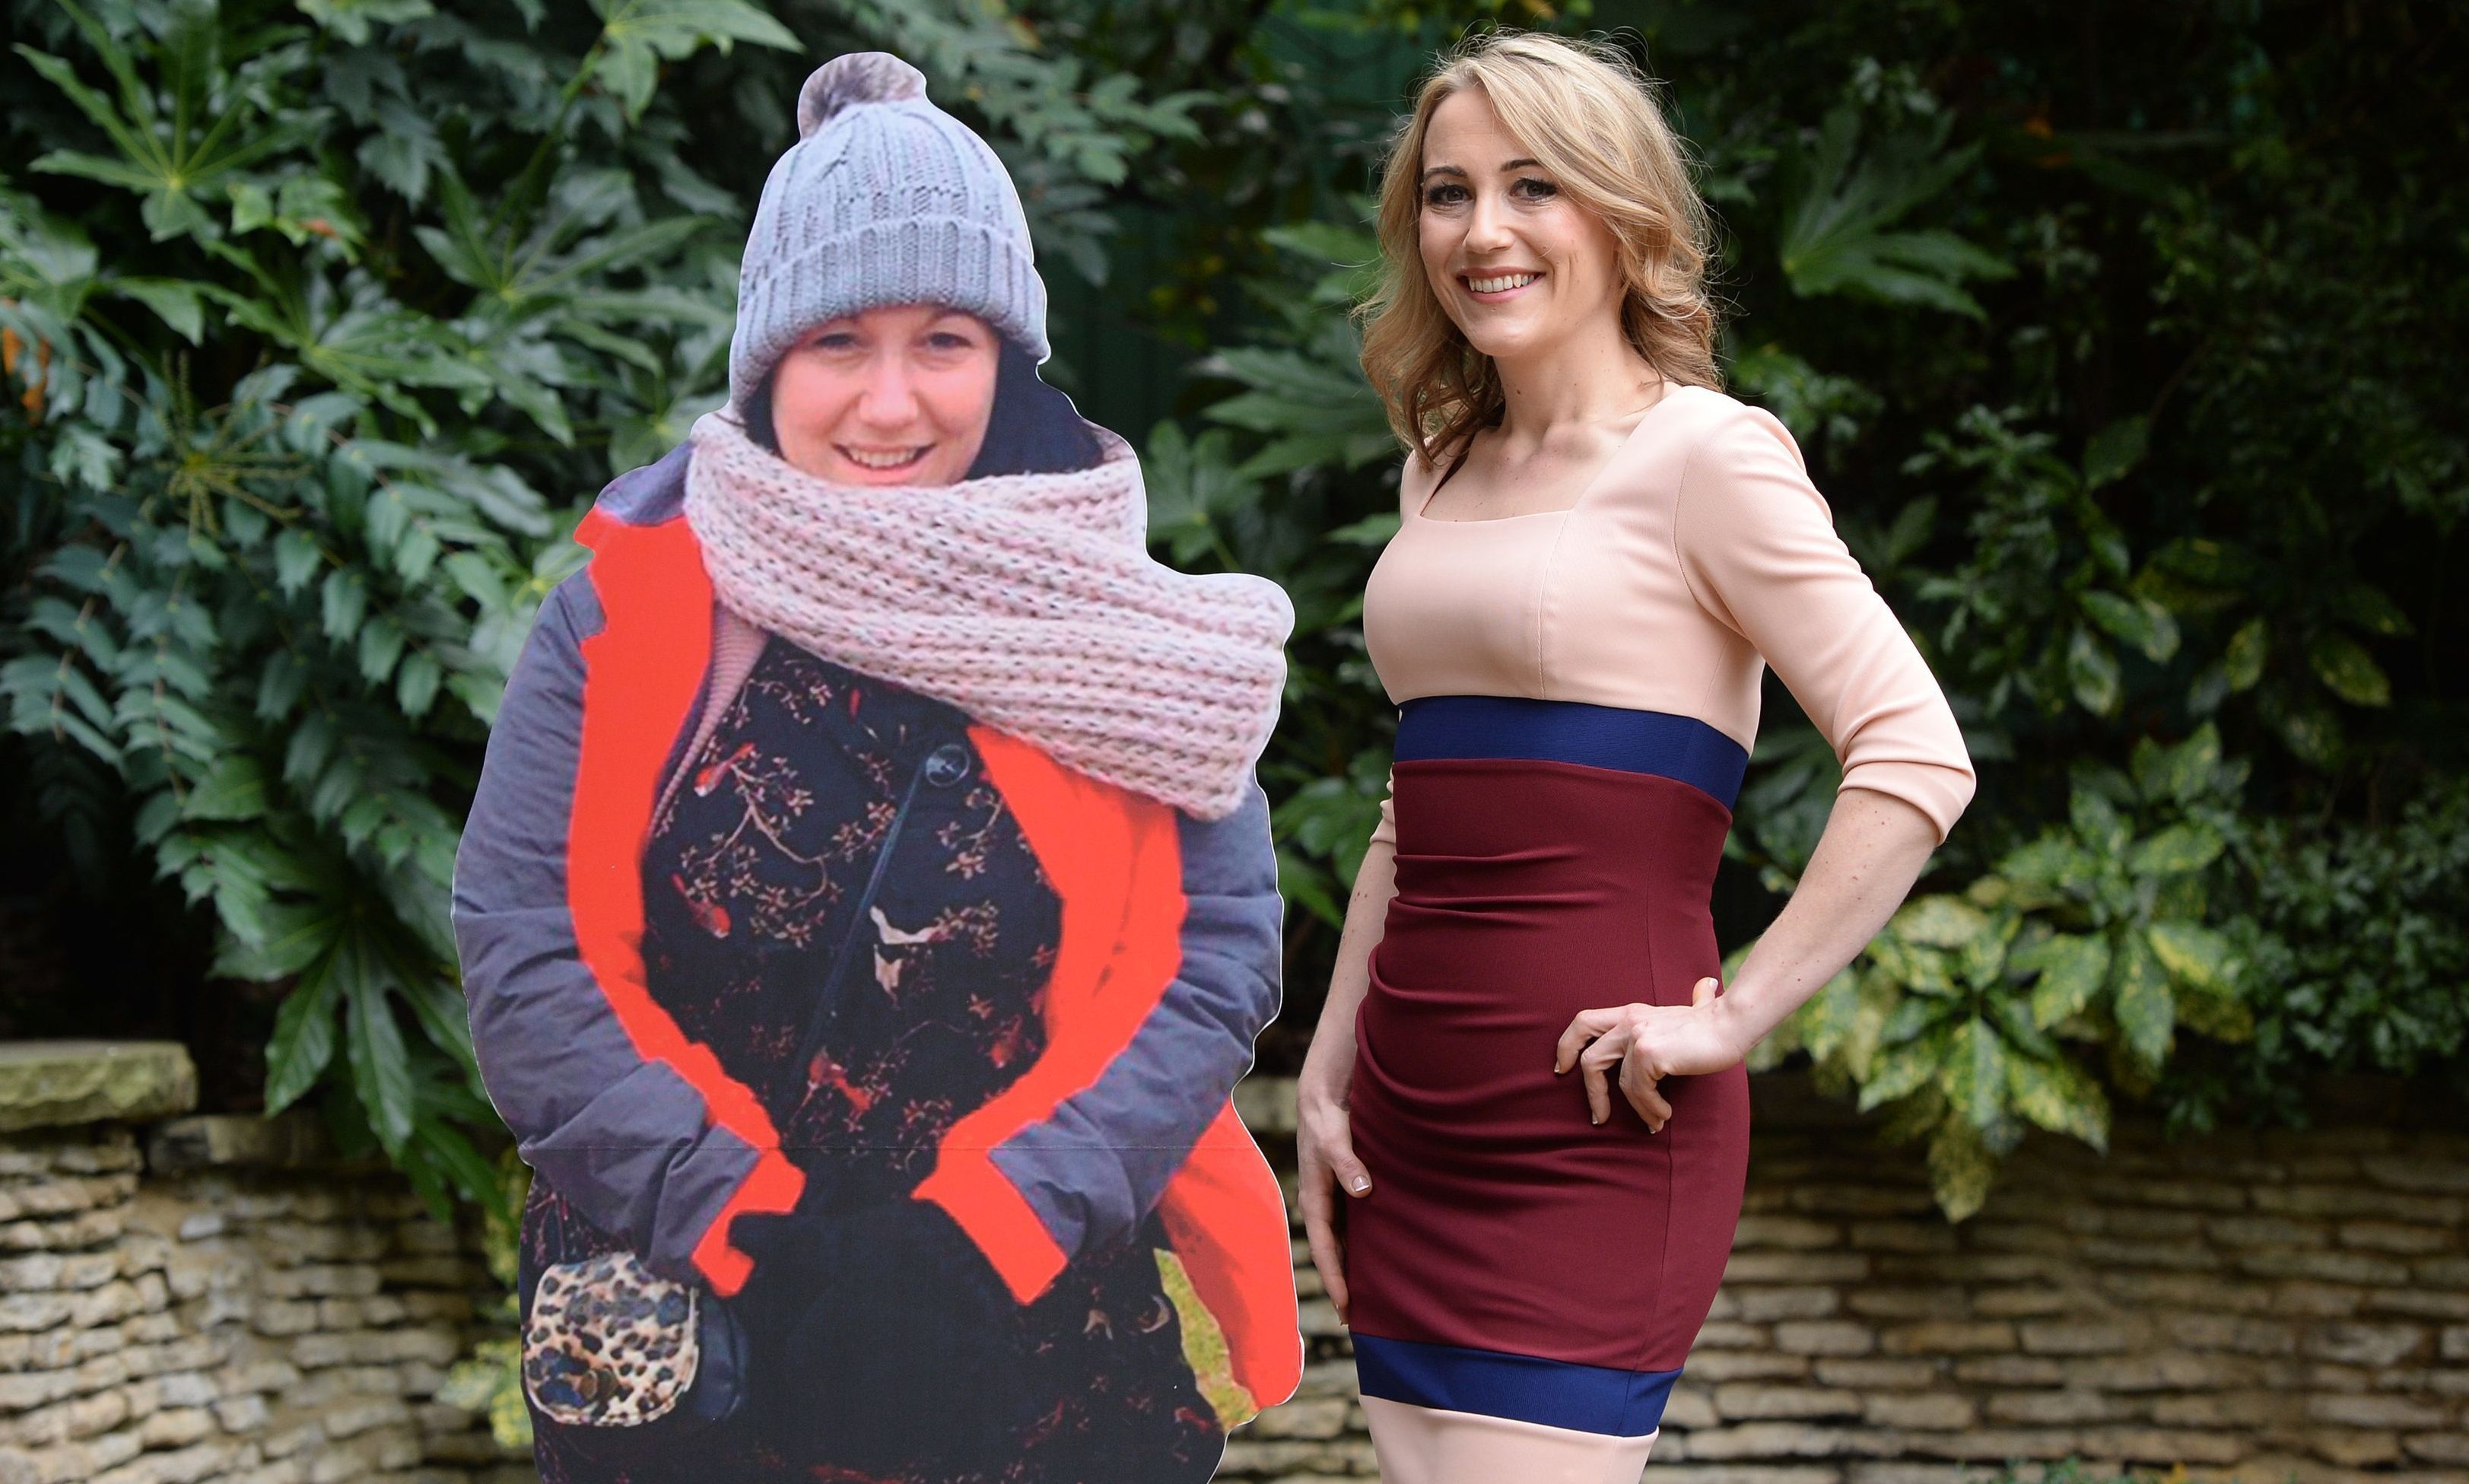 Hollie Barrett, 30, from Blunderston in Suffolk, poses with a cardboard cut-out of her former self.